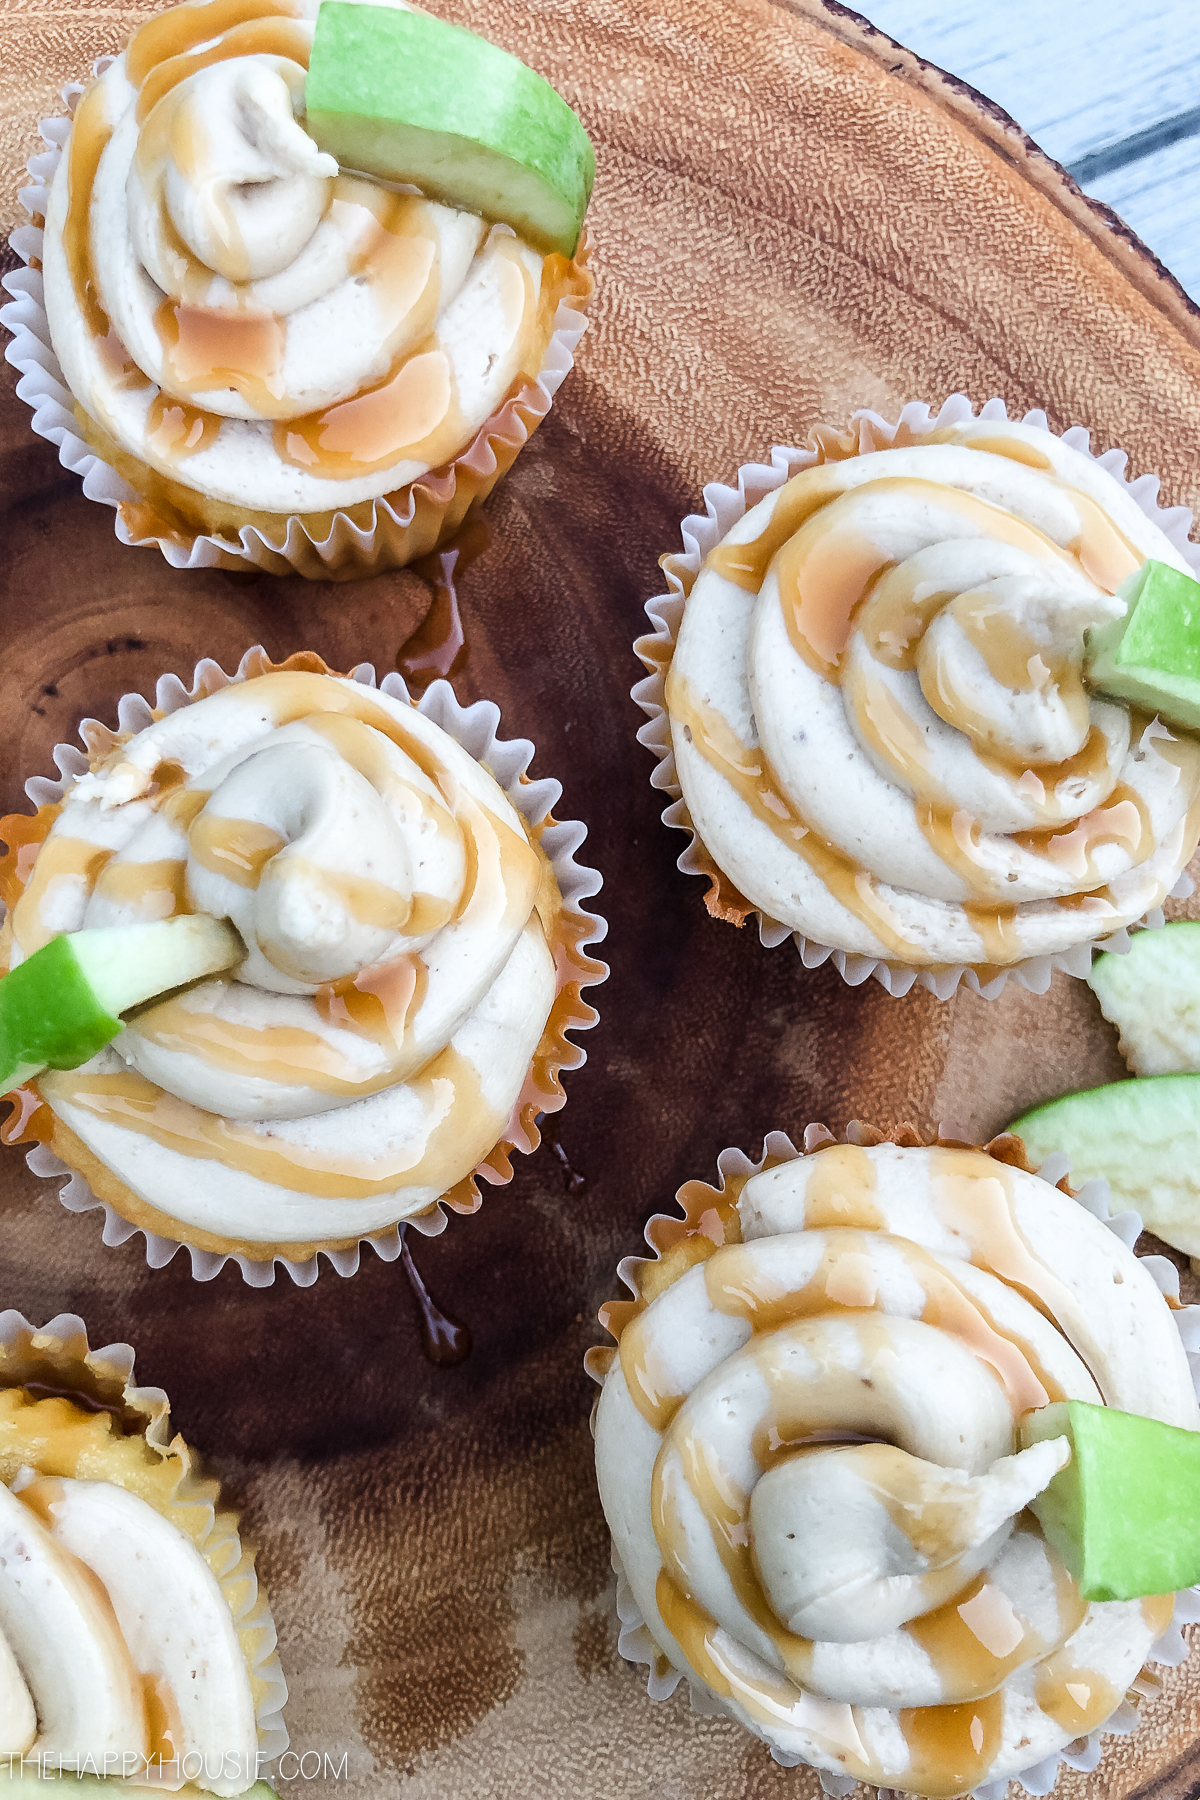 The caramel apple cupcakes on a wooden serving tray.